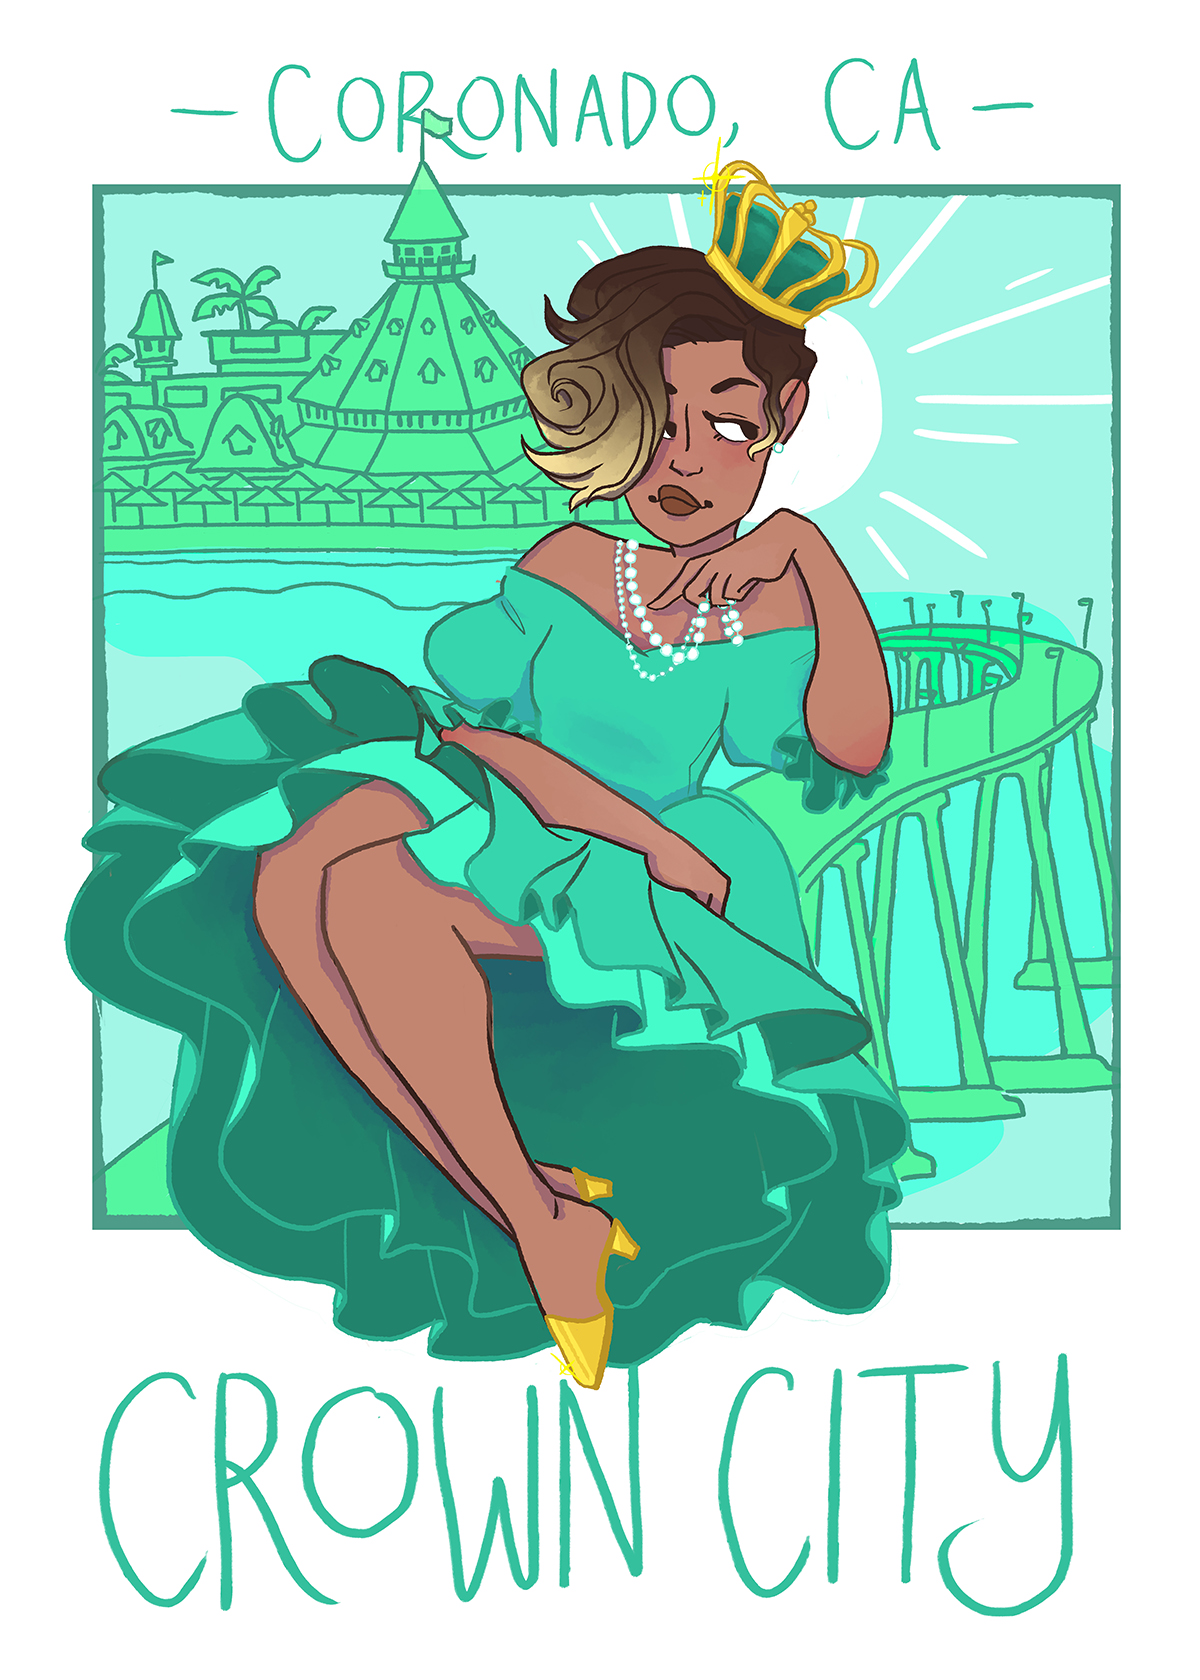 Digital illustration of a woman of color in a fancy green dress wearing a crown sitting at the end of a pier, written text in board around image reads 'Coronado, CA' at top, 'Crown City' at bottom